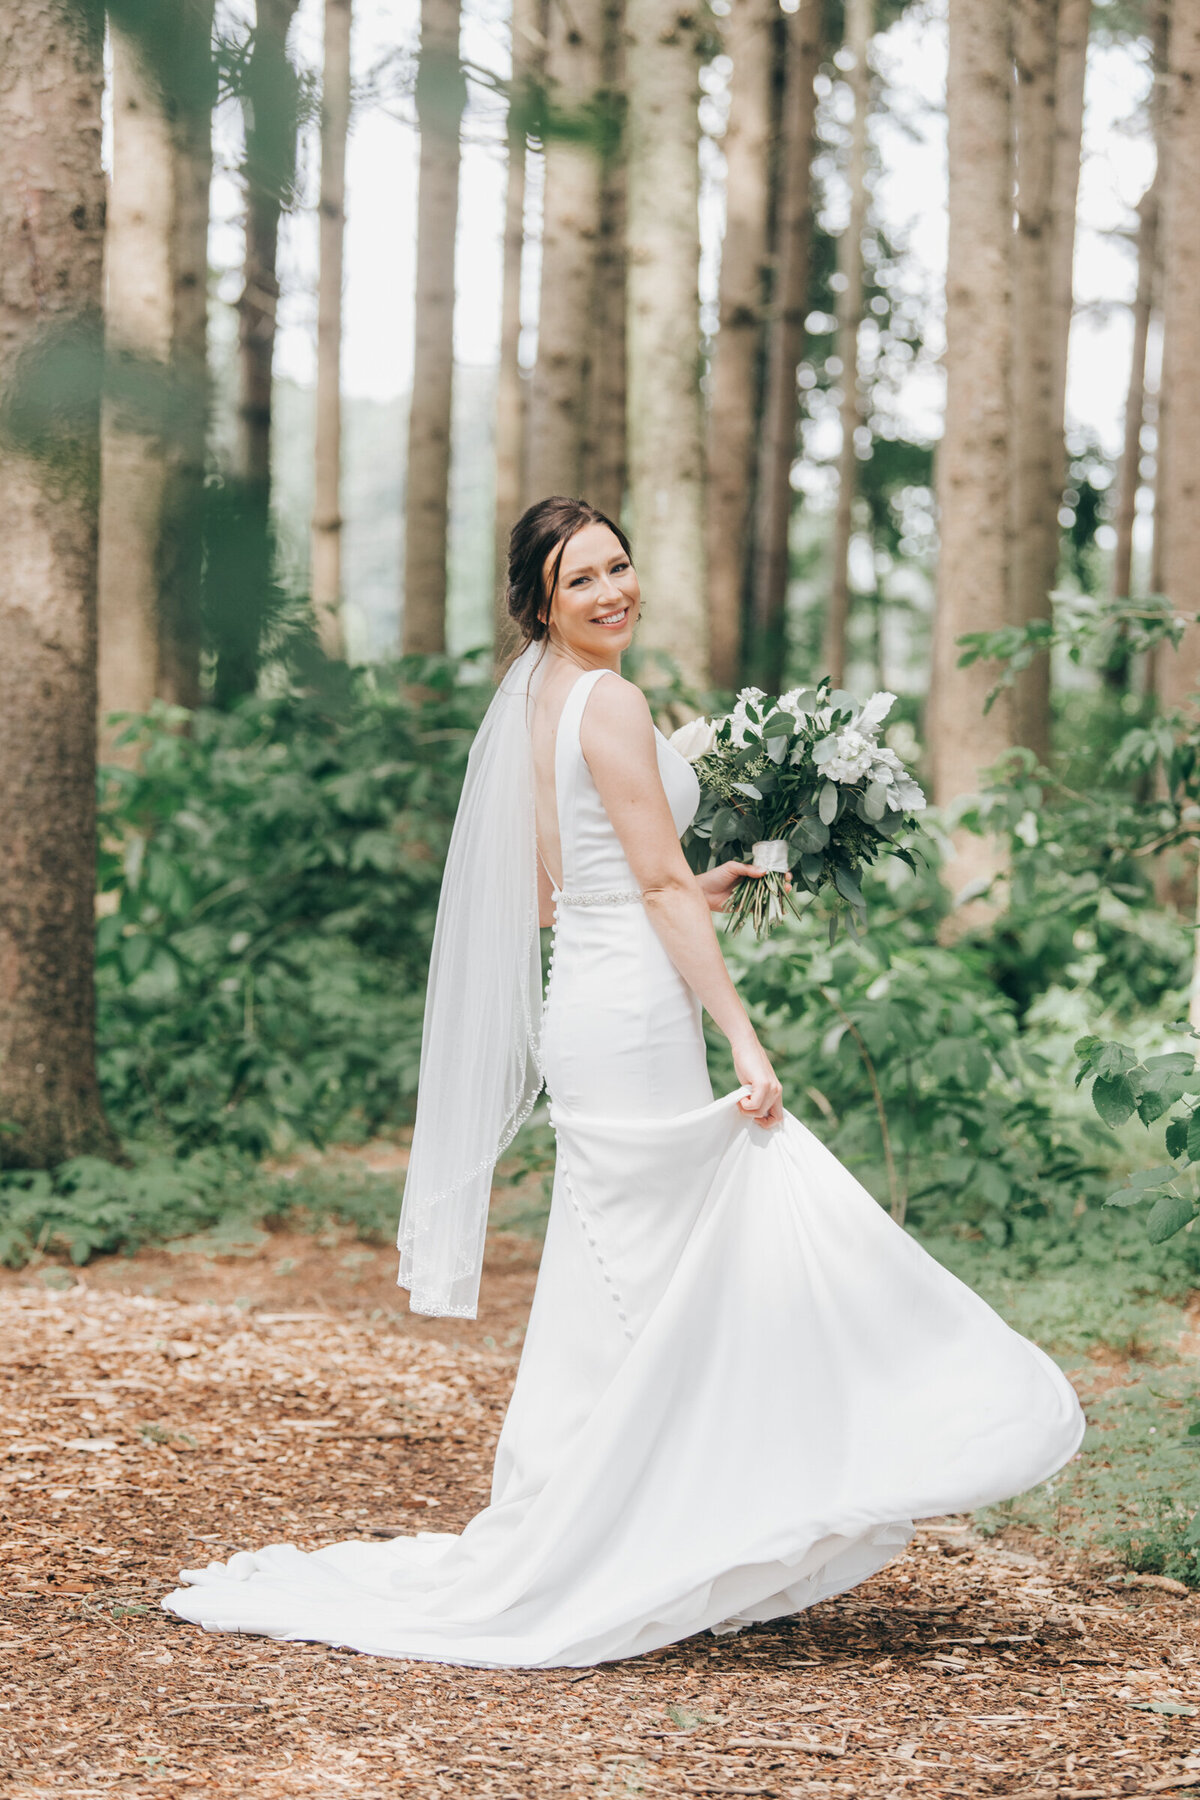 An elegant bride twirling and dancing in her white wedding dress